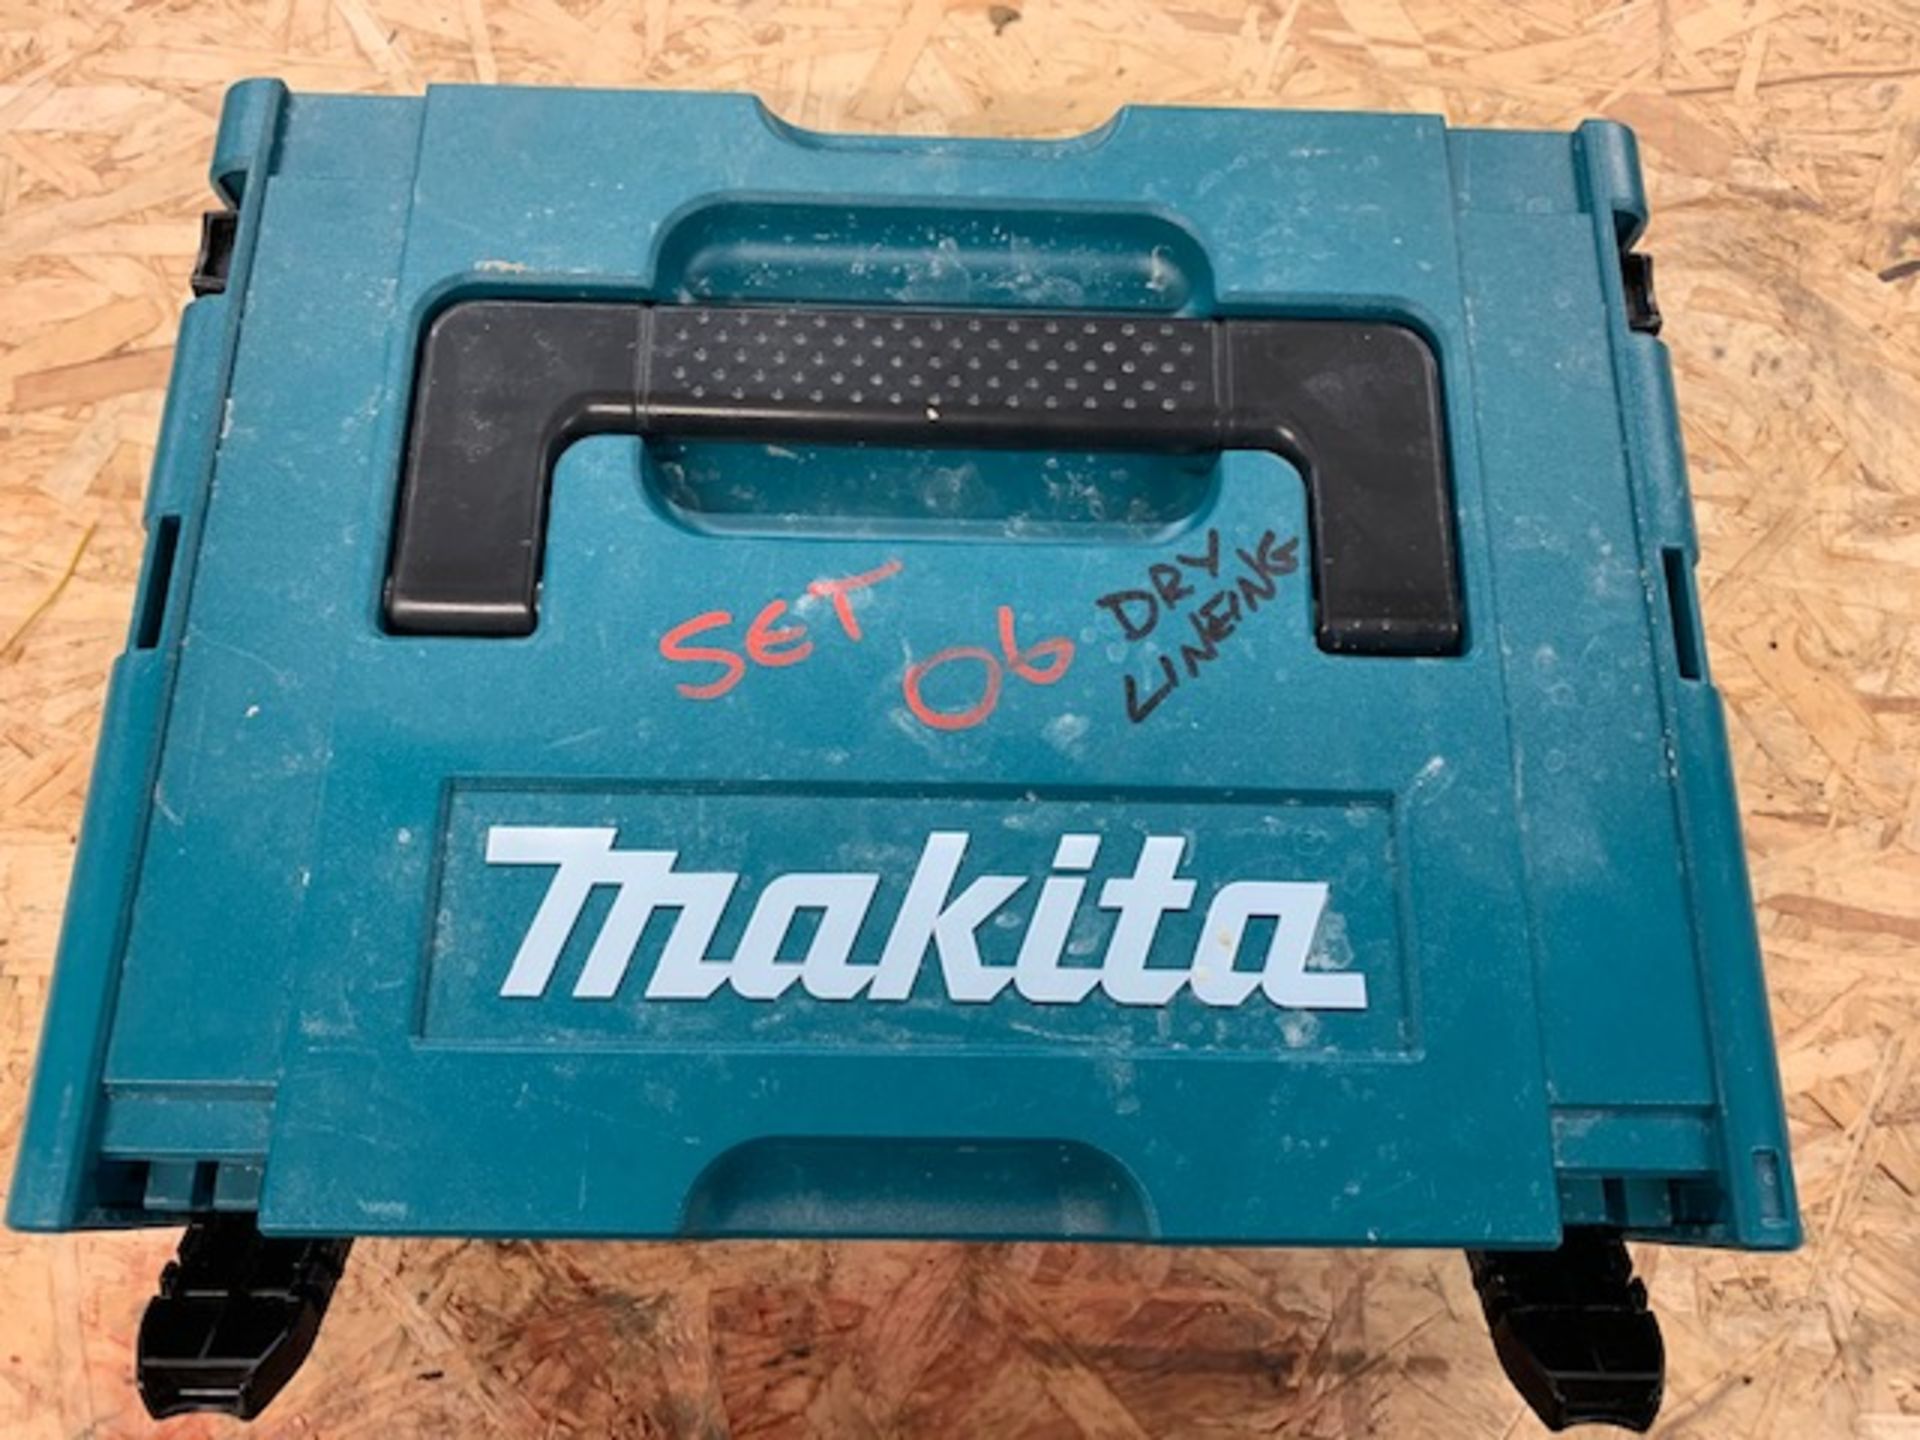 Makita DTM50 cordless multi tool c/w 1x5.0ah lithium batteries + DC18RC 20 v charger and case - Image 2 of 2